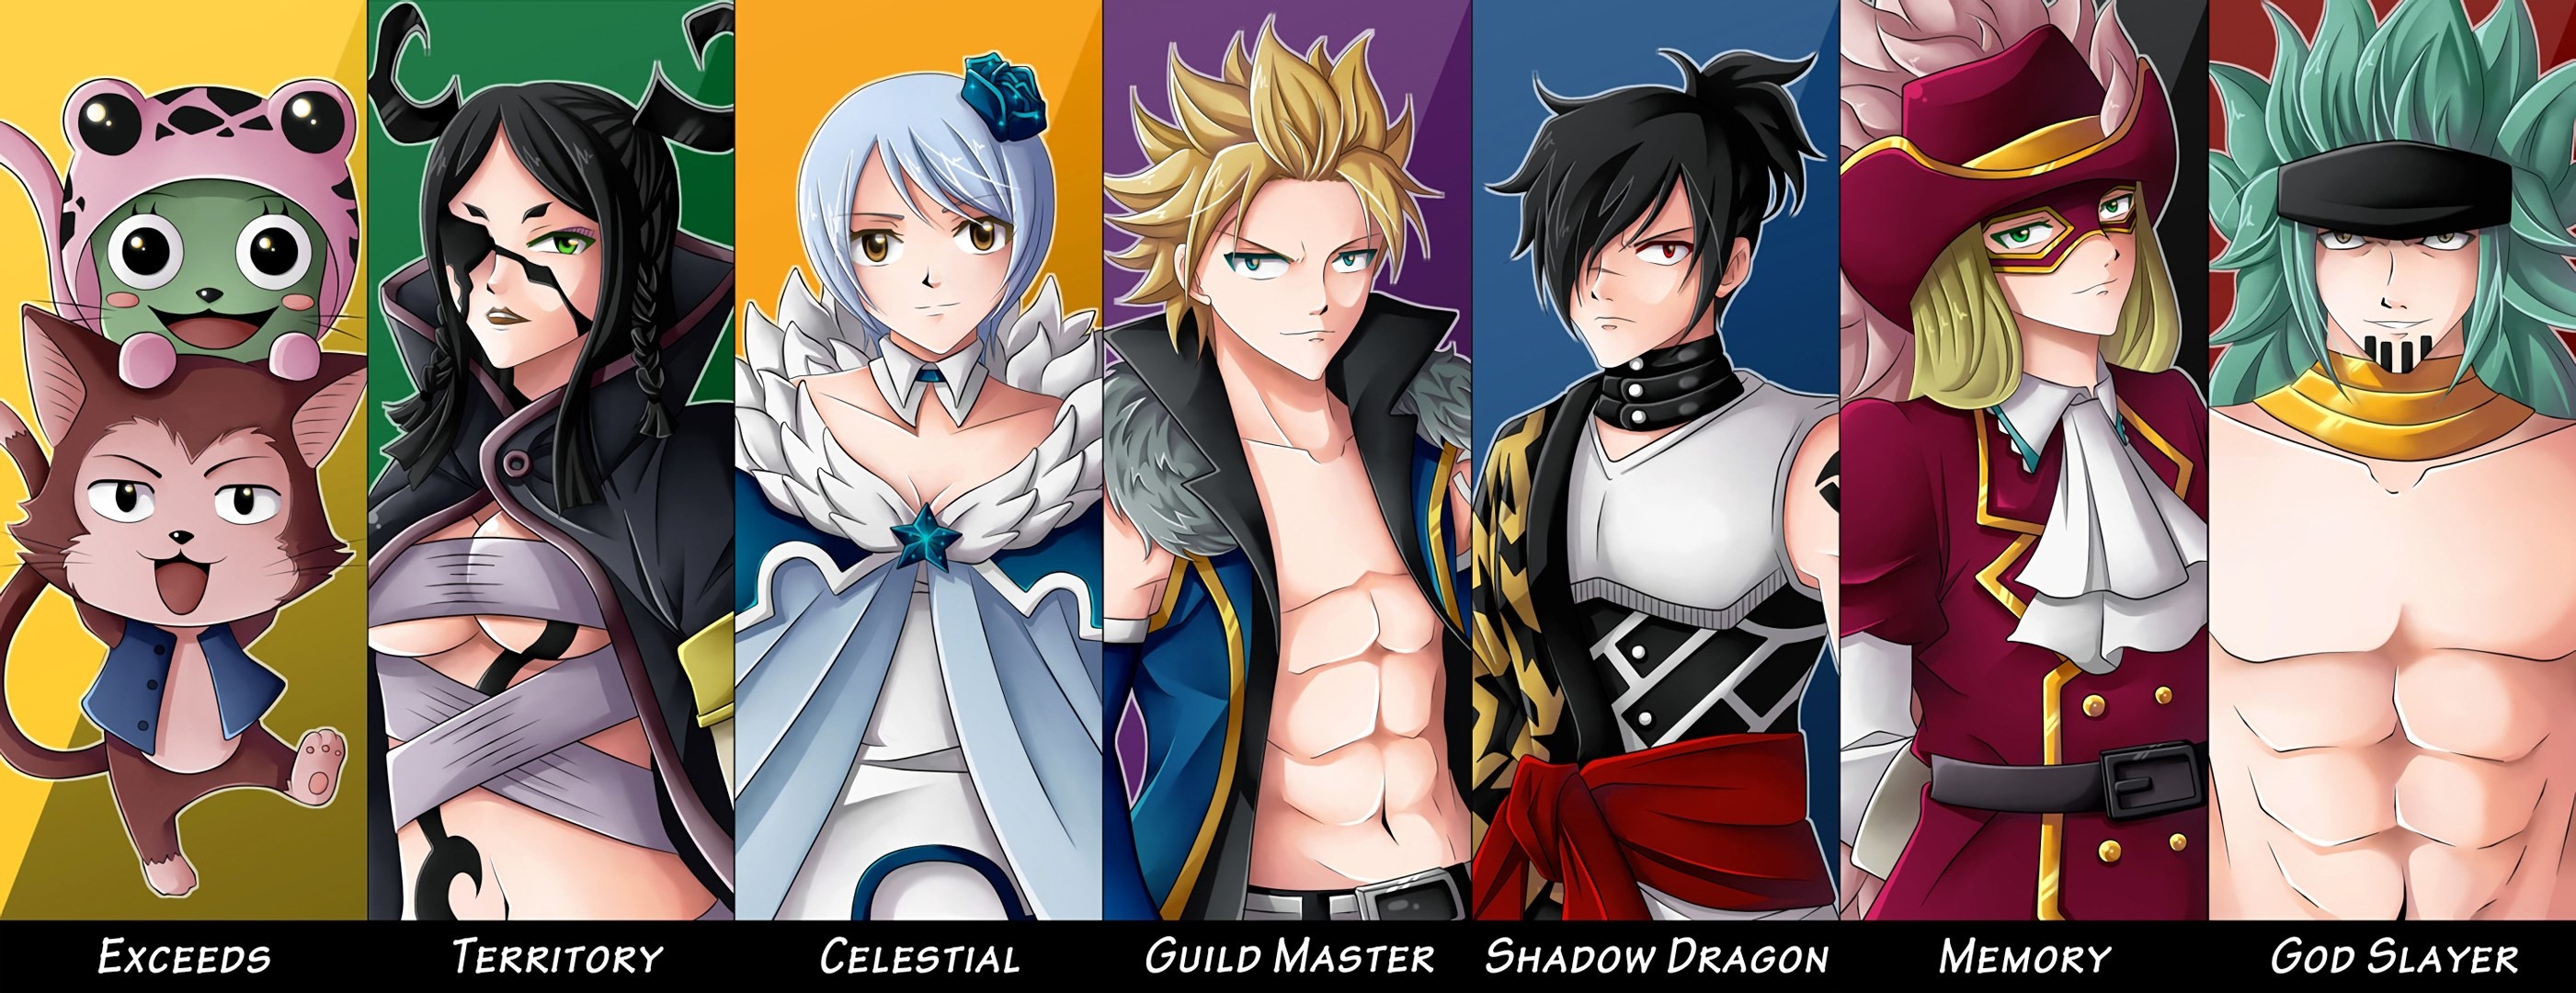 2802x1080 hd wallpaper fairy tail - fairy tail category